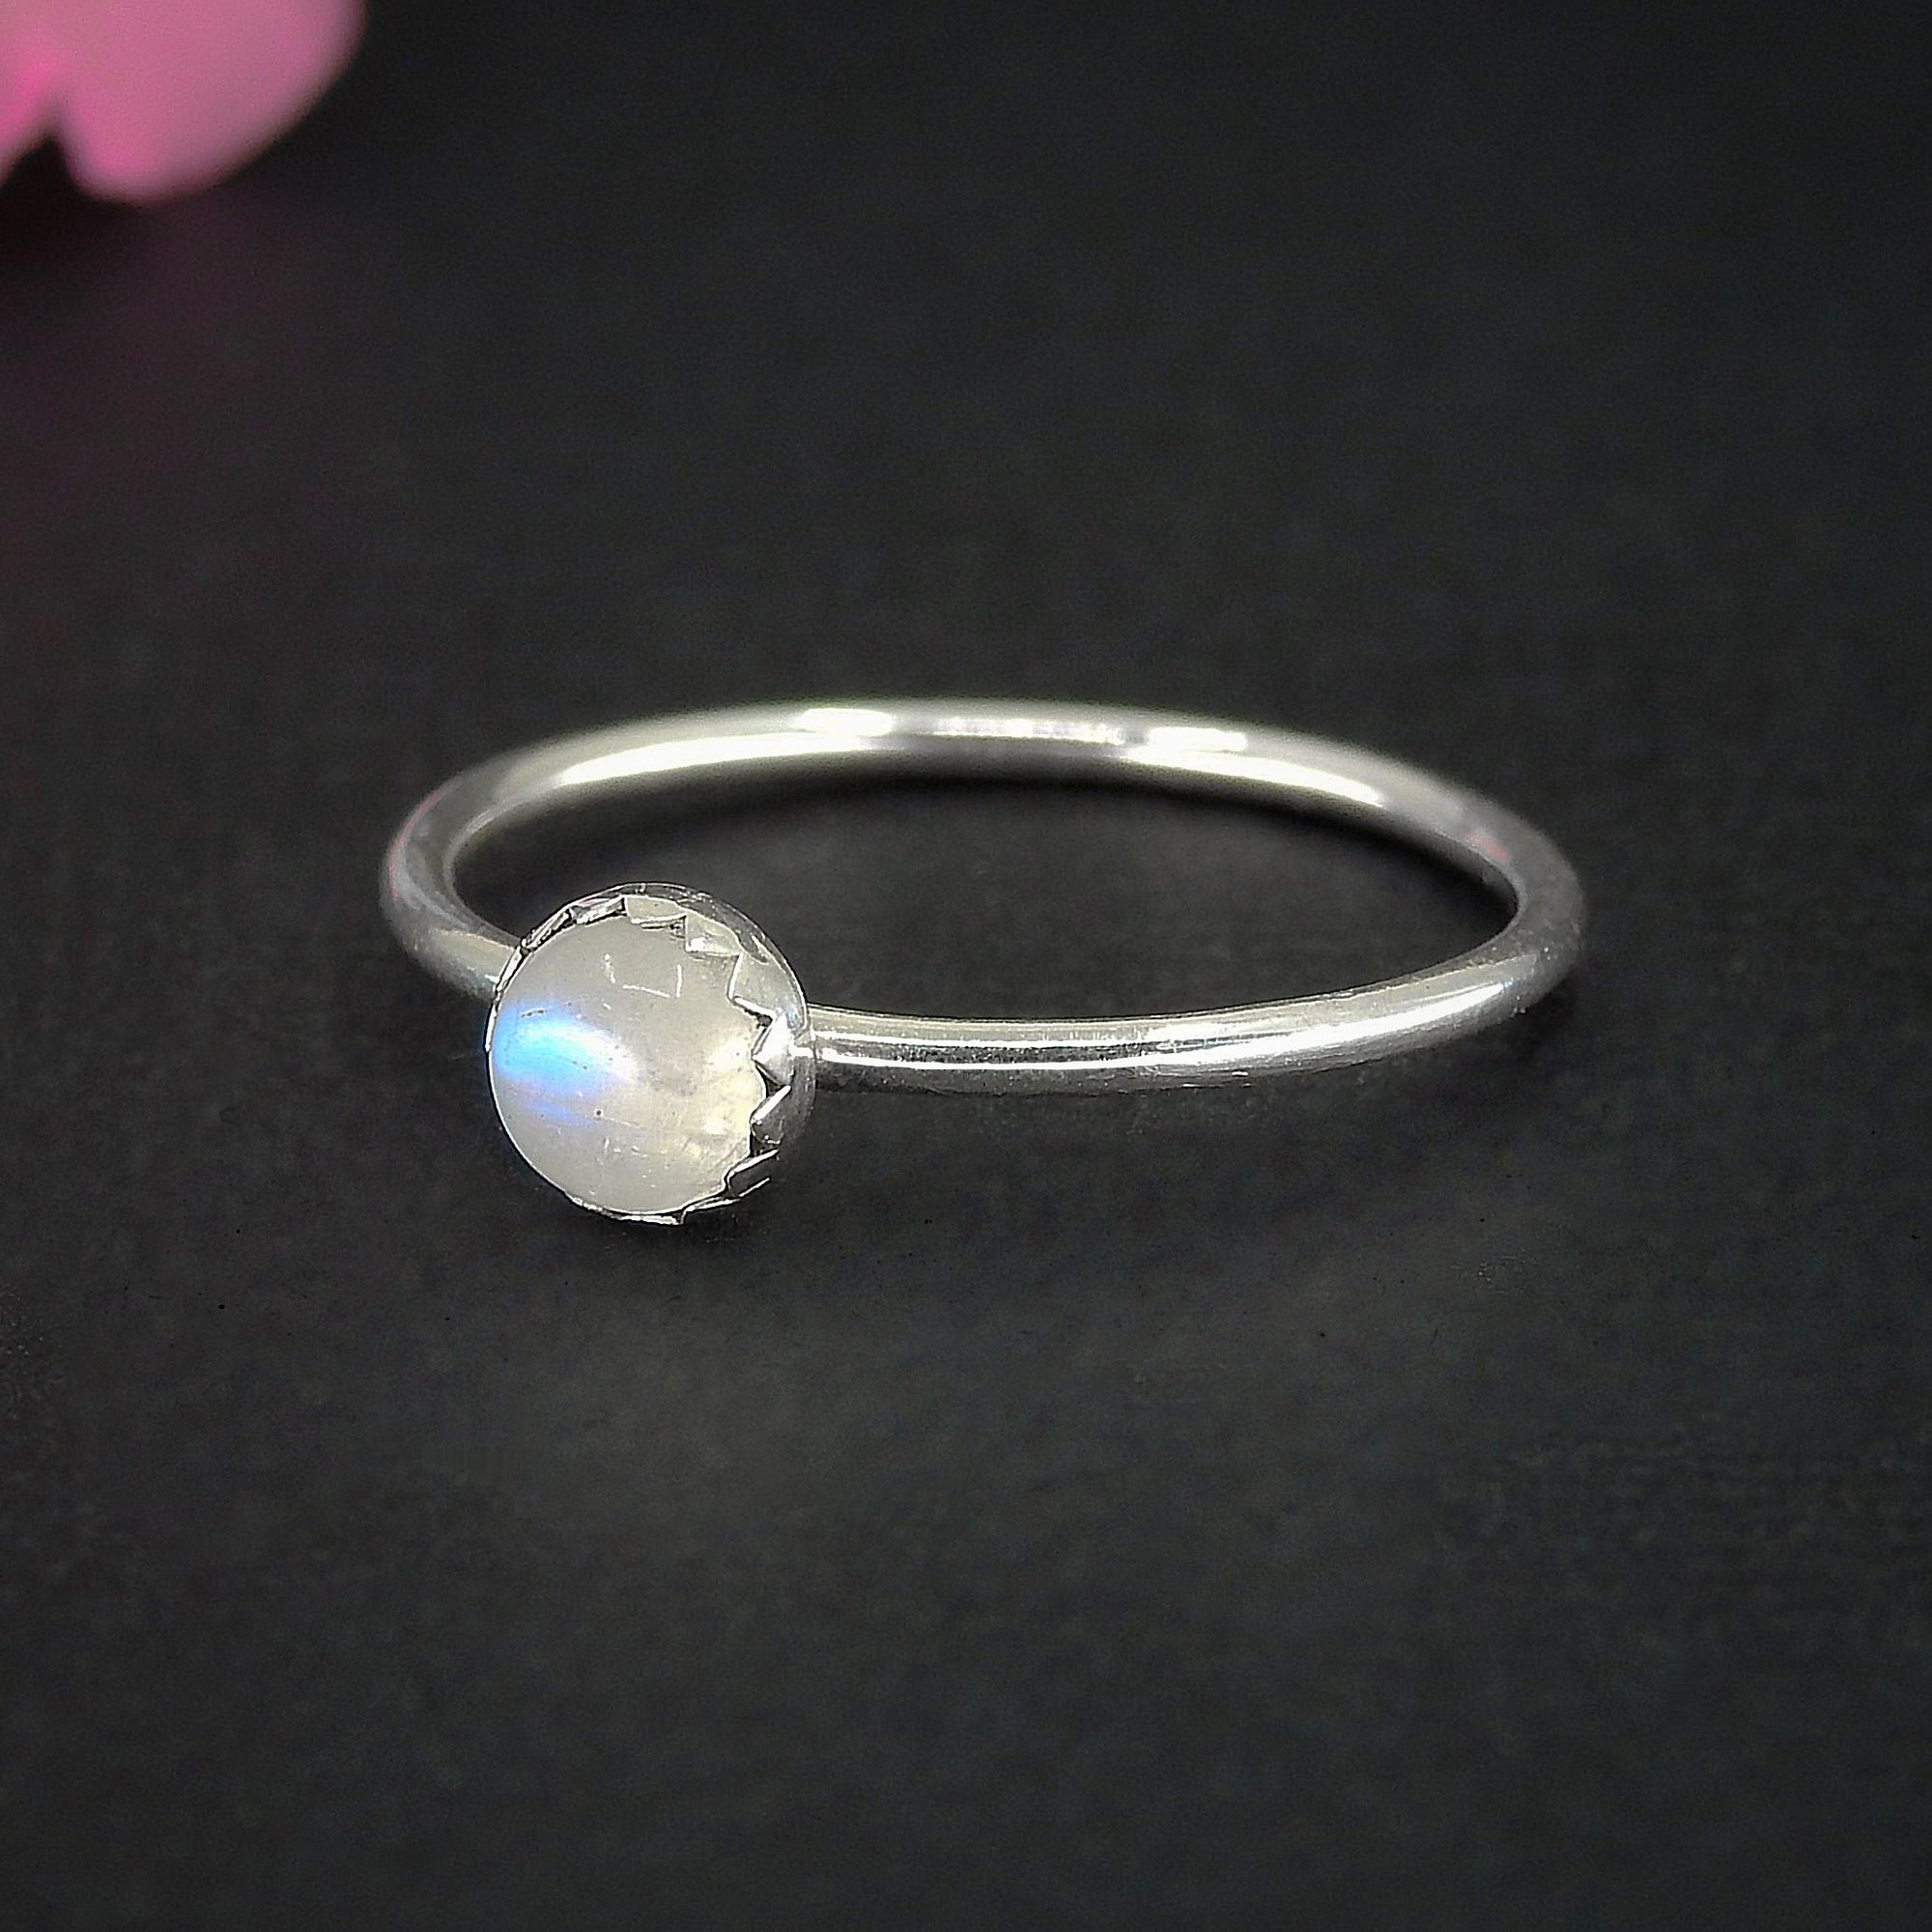 Moonstone Ring - Made to Order